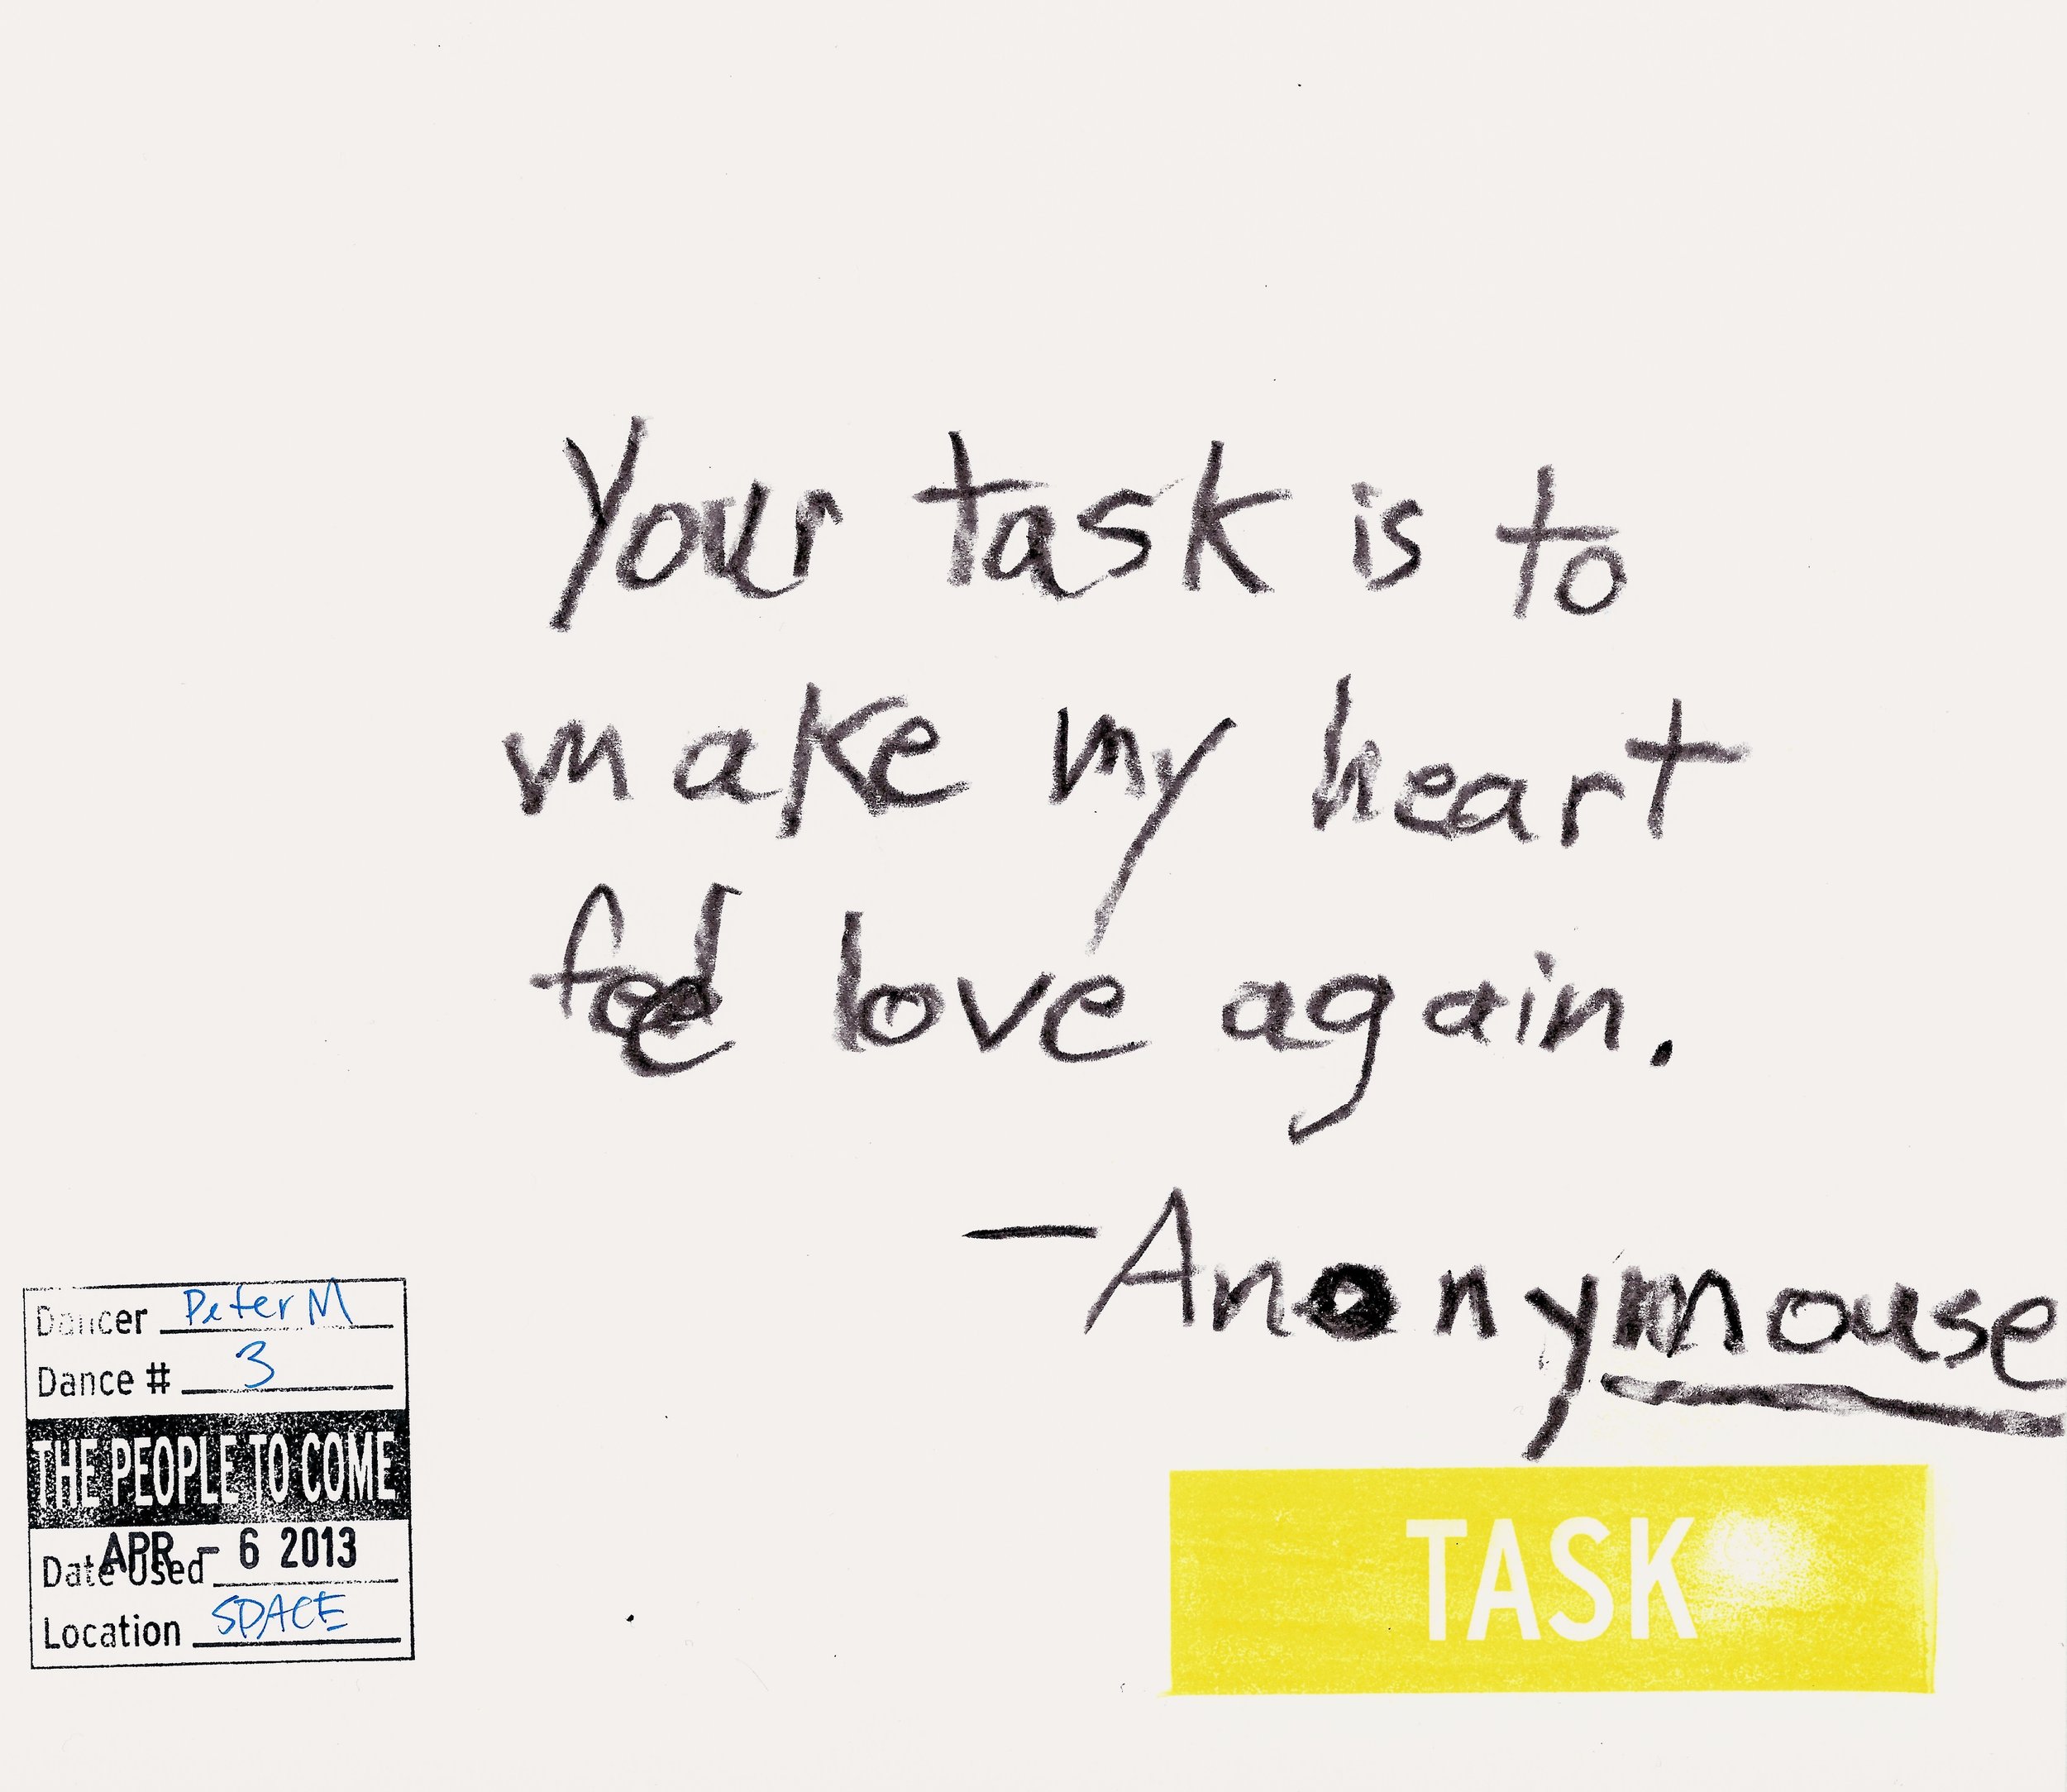 “Your task is to make my heart feel love again - Anonymouse” written in crayon and with a yellow “Task” stamp on it. A submission to The People To Come.